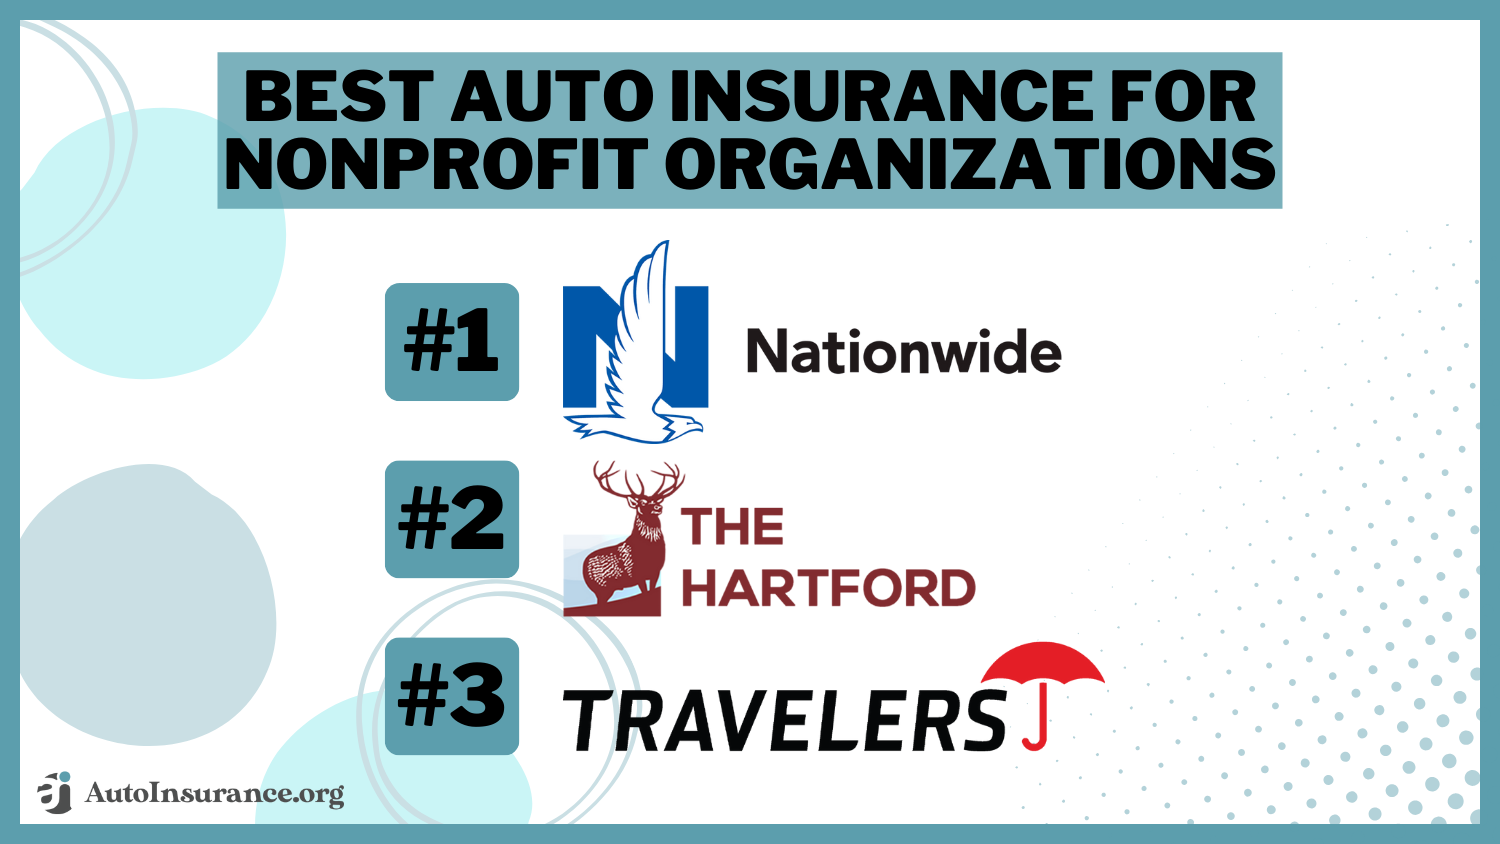 Best Auto Insurance for Nonprofit Organizations: Nationwide, The Hartford, Travelers